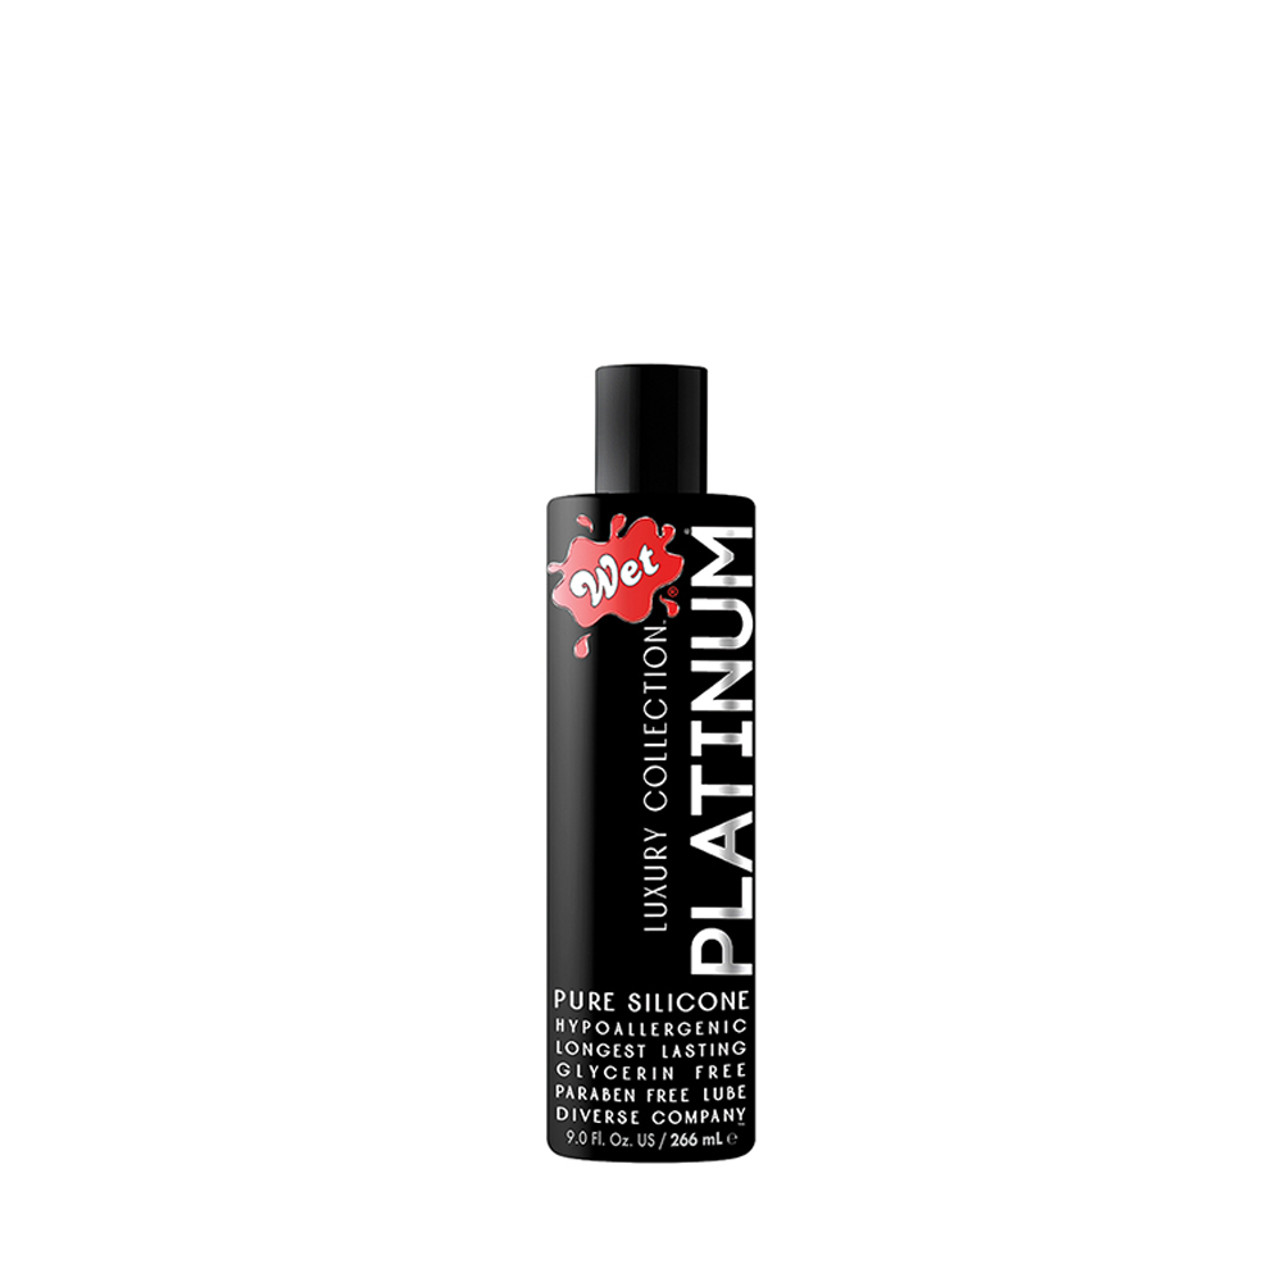 Buy the Wet Lube Luxury Collection Platinum Silicone-based Personal  Lubricant in 9 oz 510K FDA